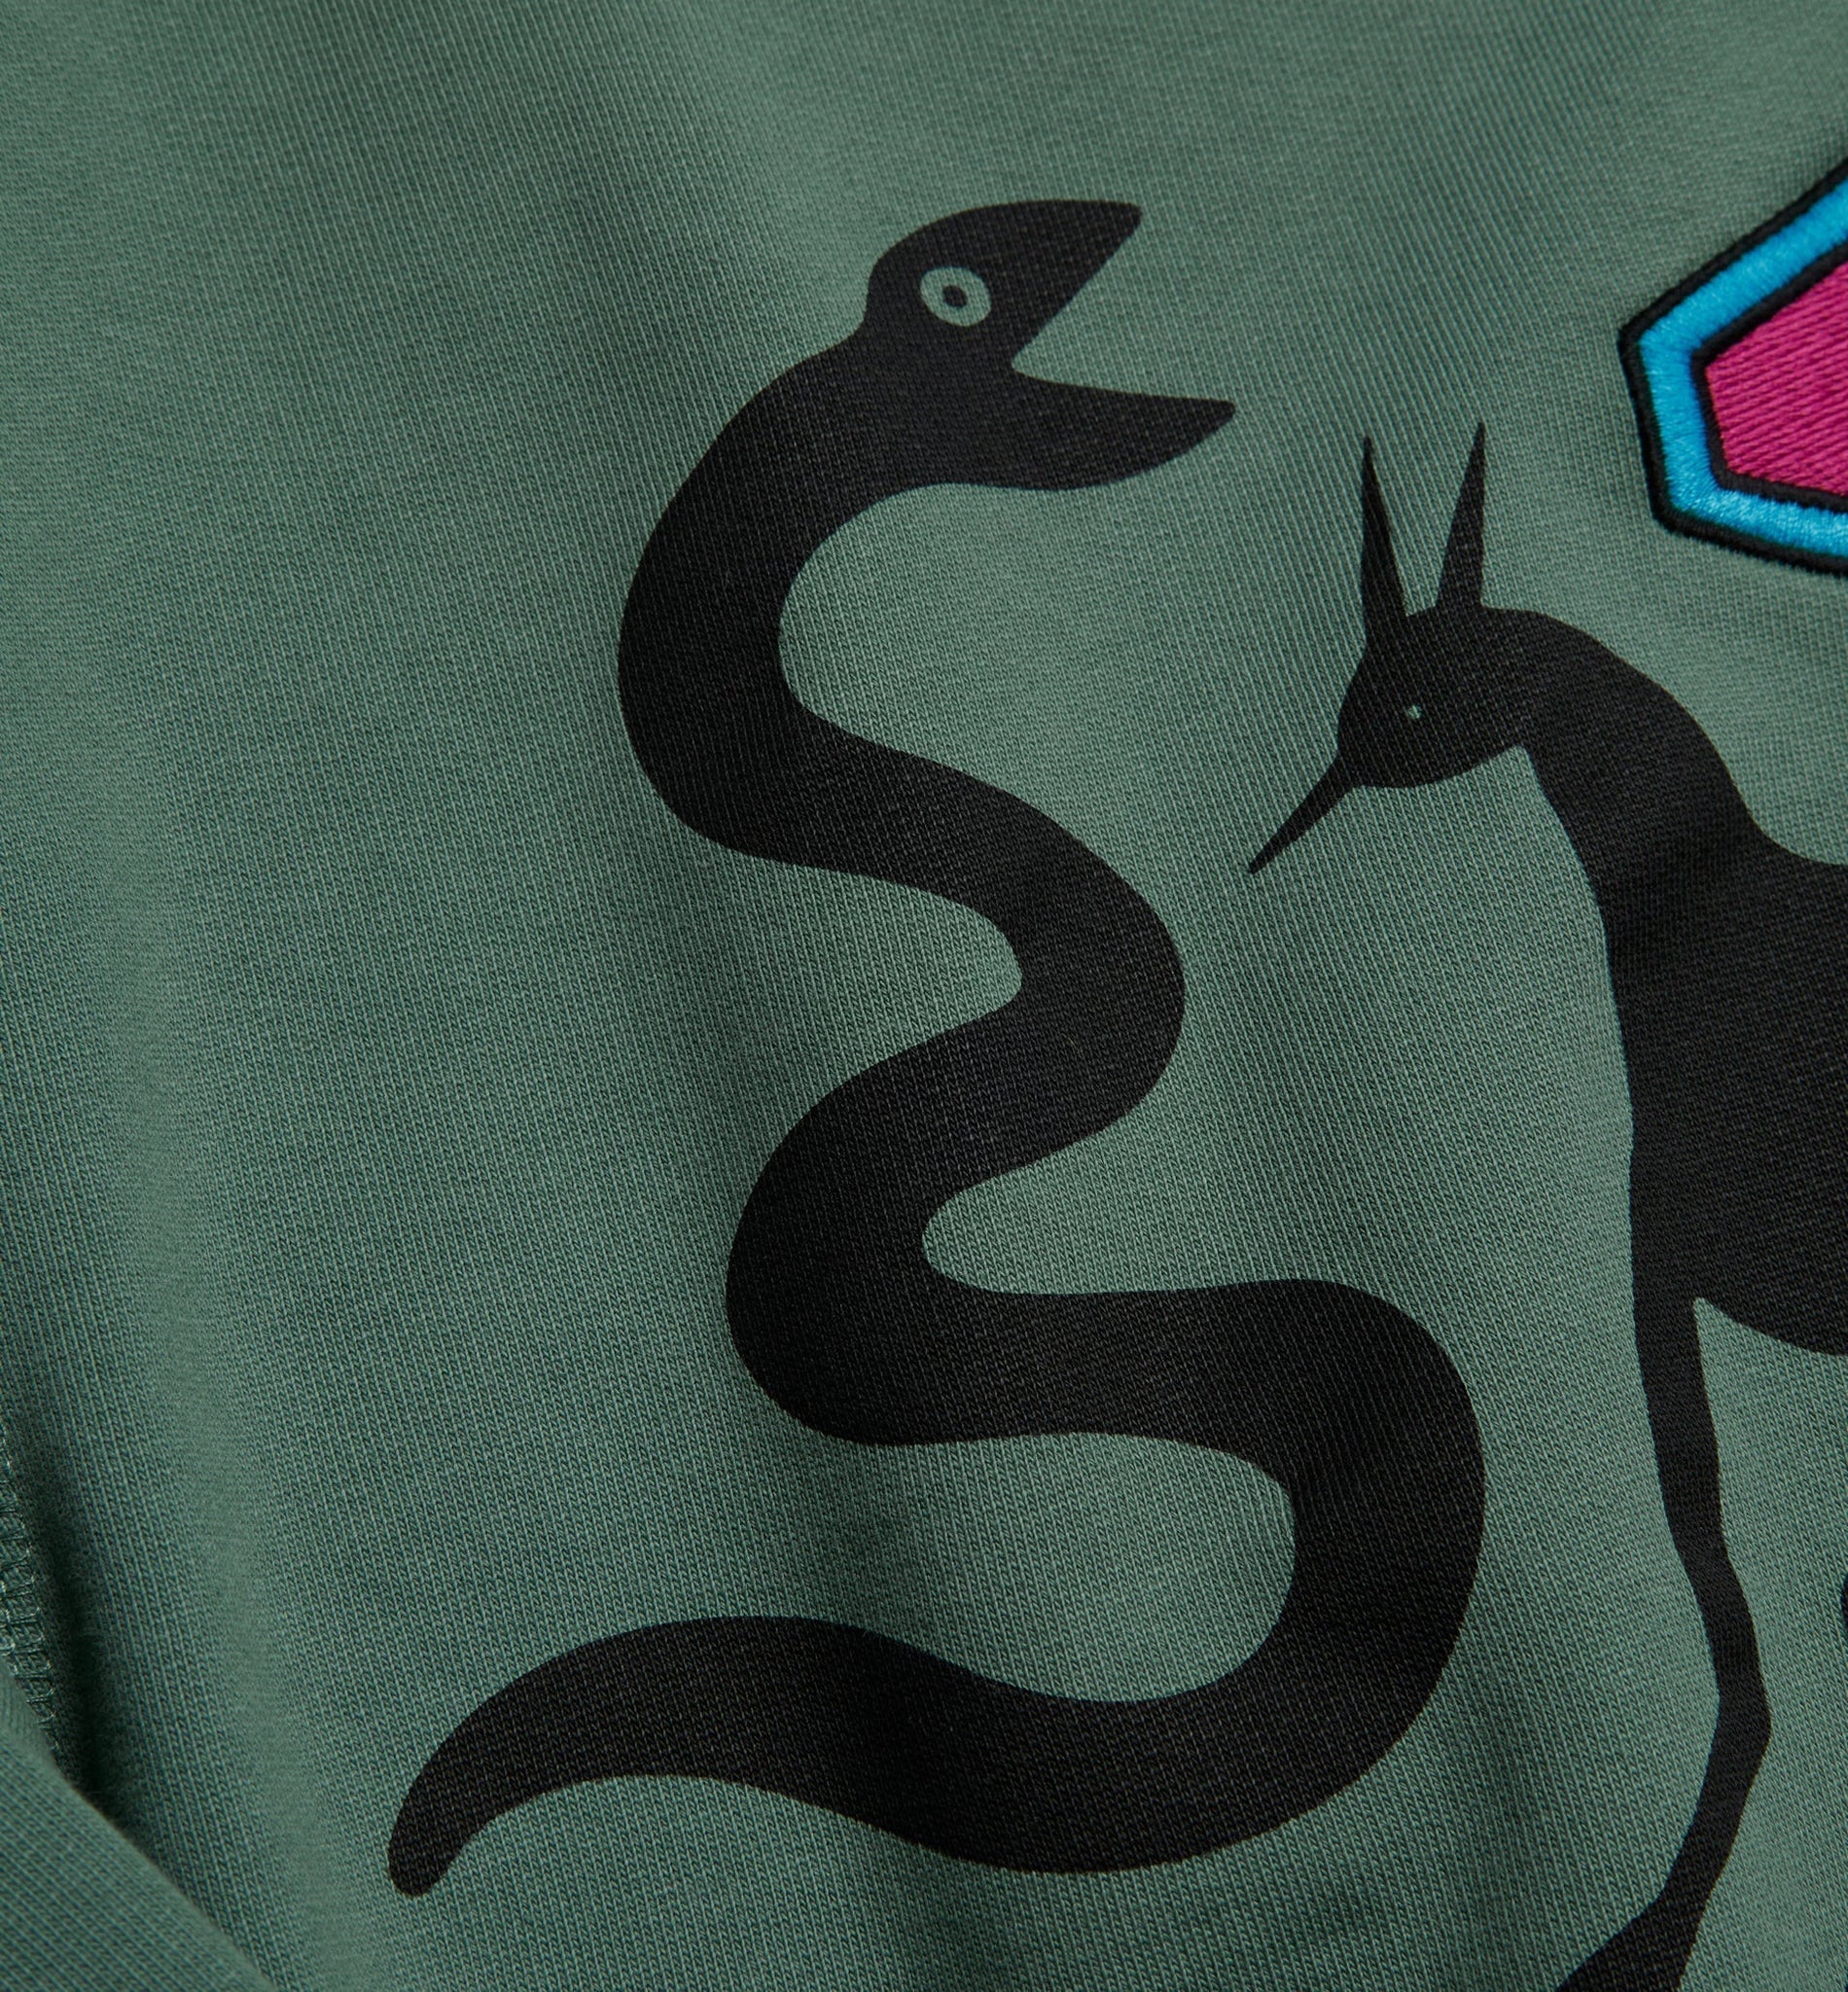 Snaked by a Horse Crew Neck Sweatshirt - Pine Green